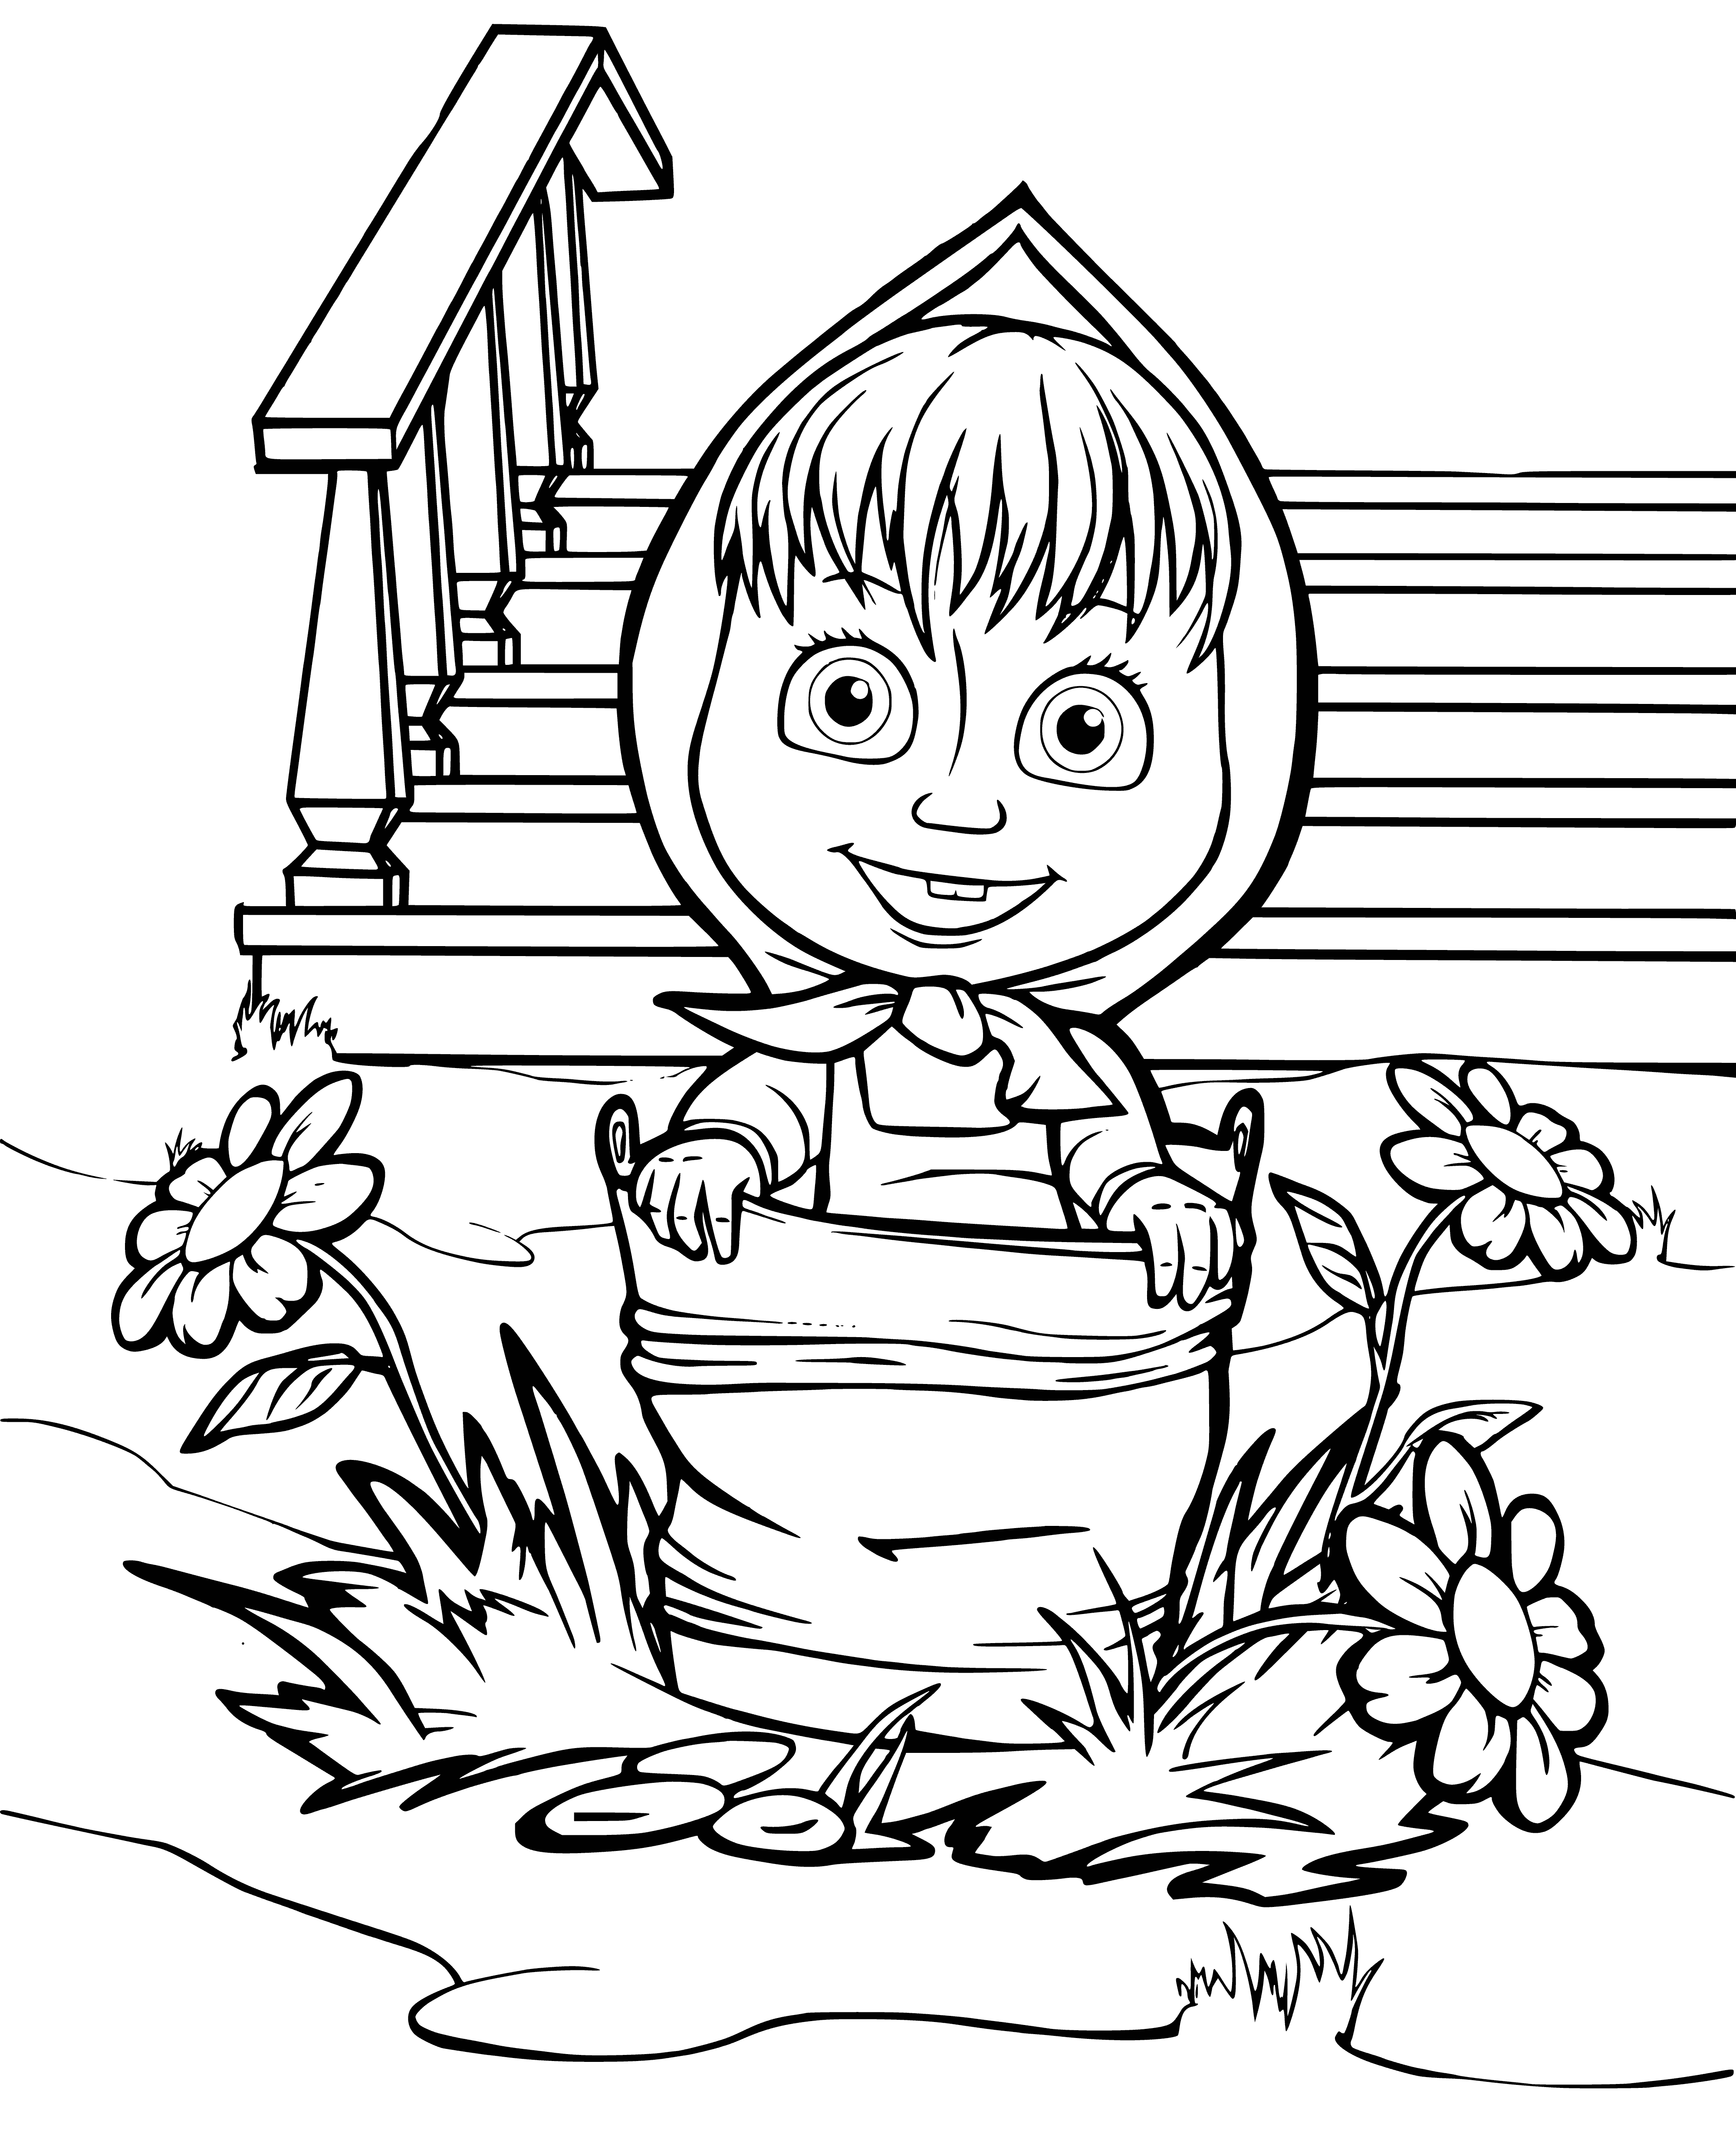 coloring page: Masha hugs a bear while wearing a red dress in a coloring page.